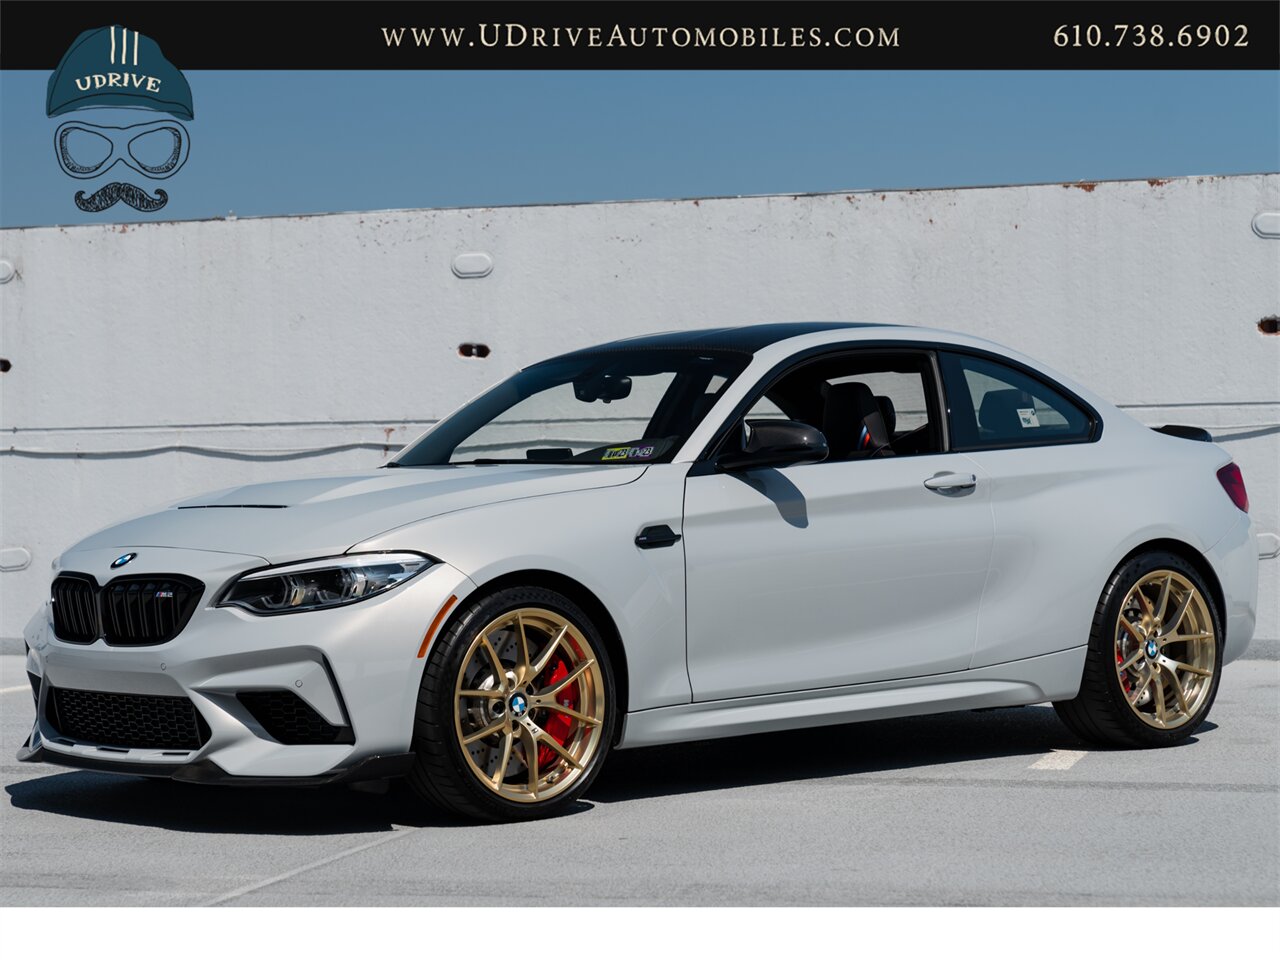 2020 BMW M2 CS  M2 CS 6 Speed Manual 2k Miles Full Body PPF Factory Warranty until 2025 - Photo 10 - West Chester, PA 19382